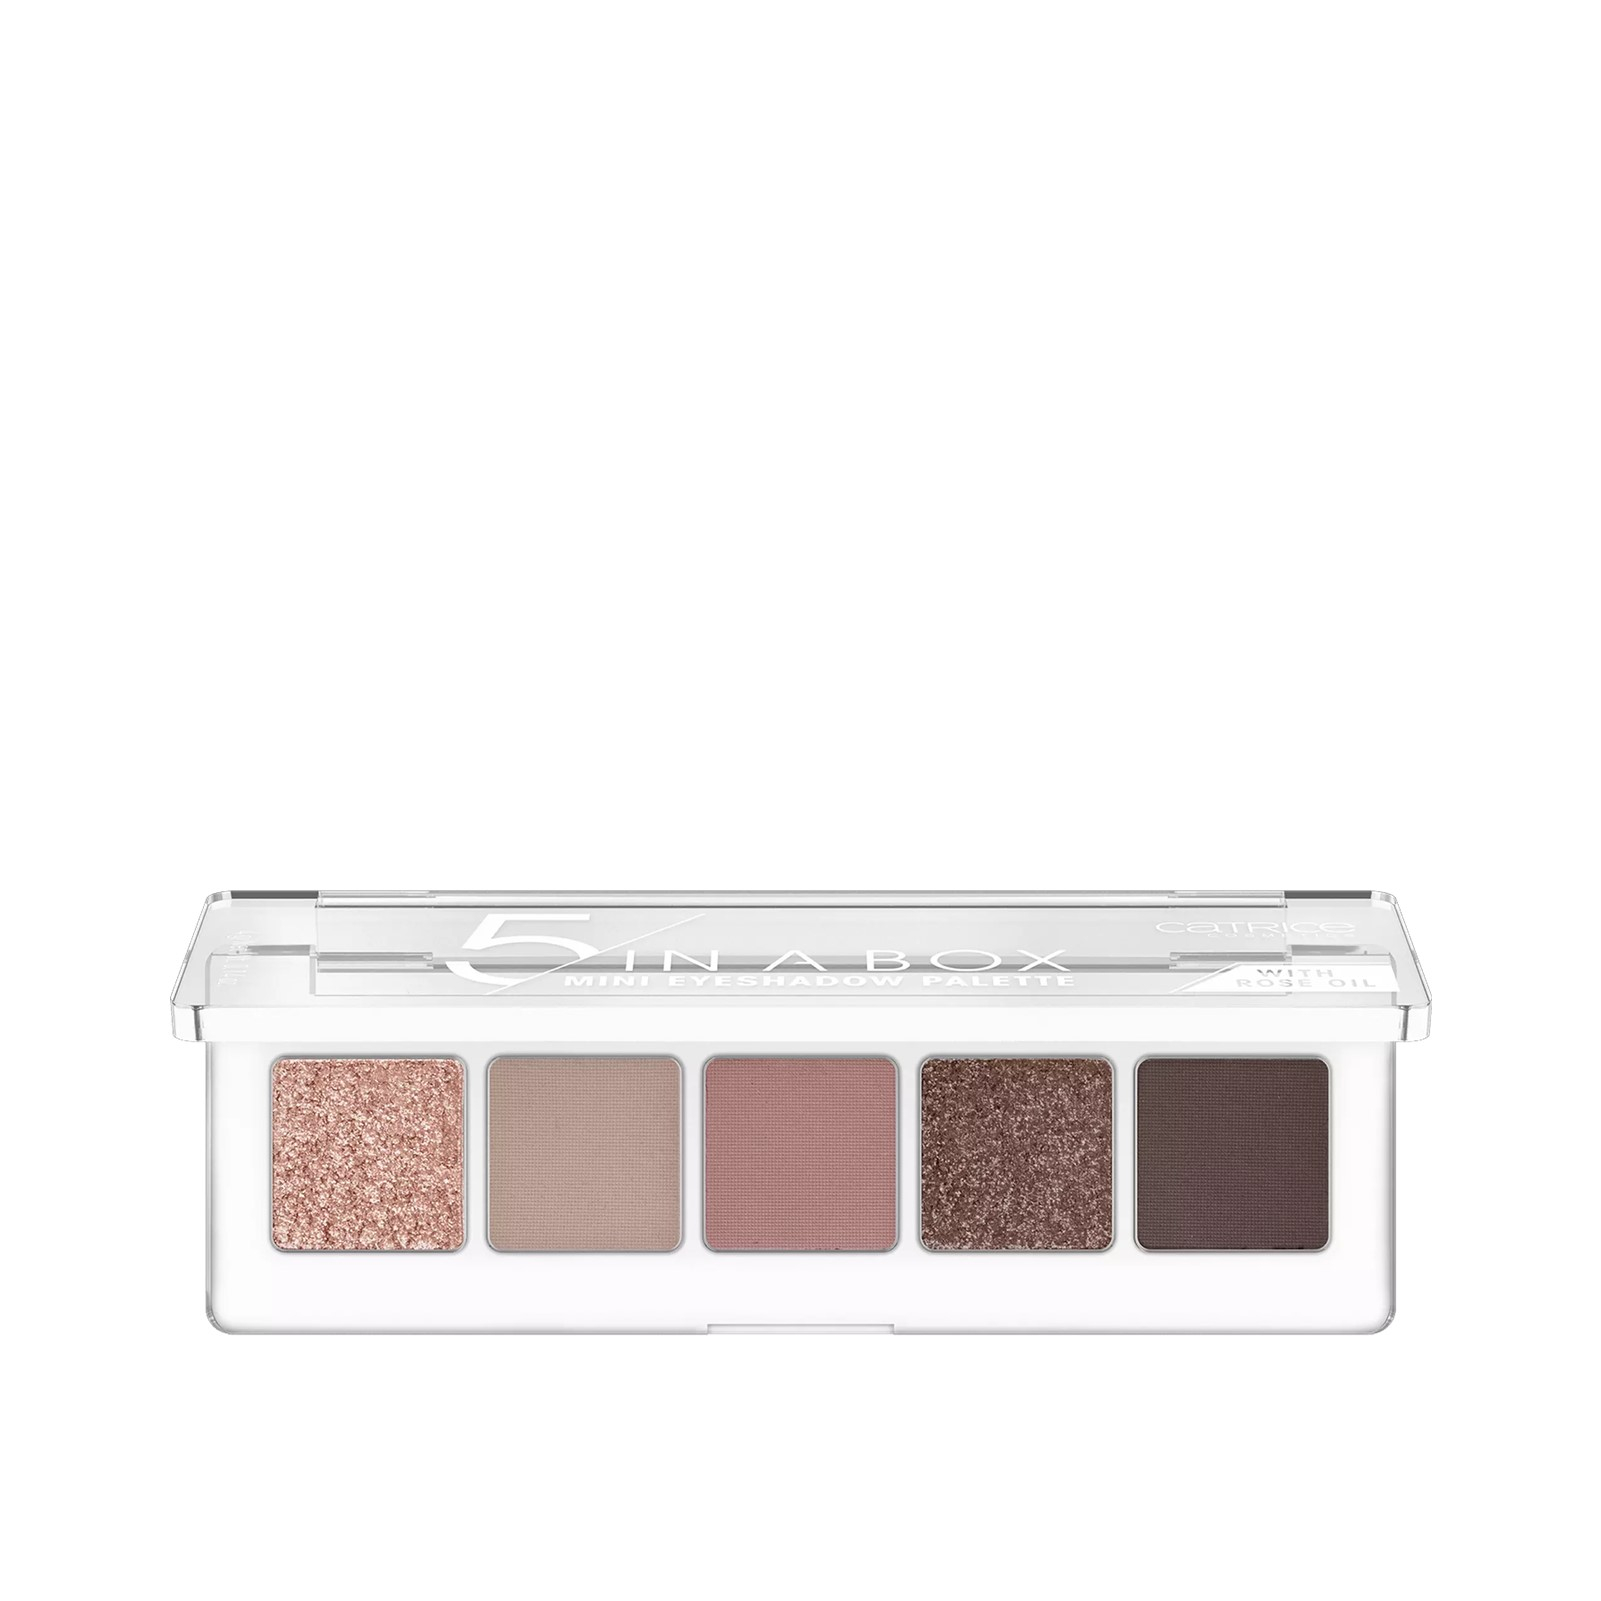 In 5 Palette Soft USA Rose Buy 020 A Mini · Box Eyeshadow Look Catrice